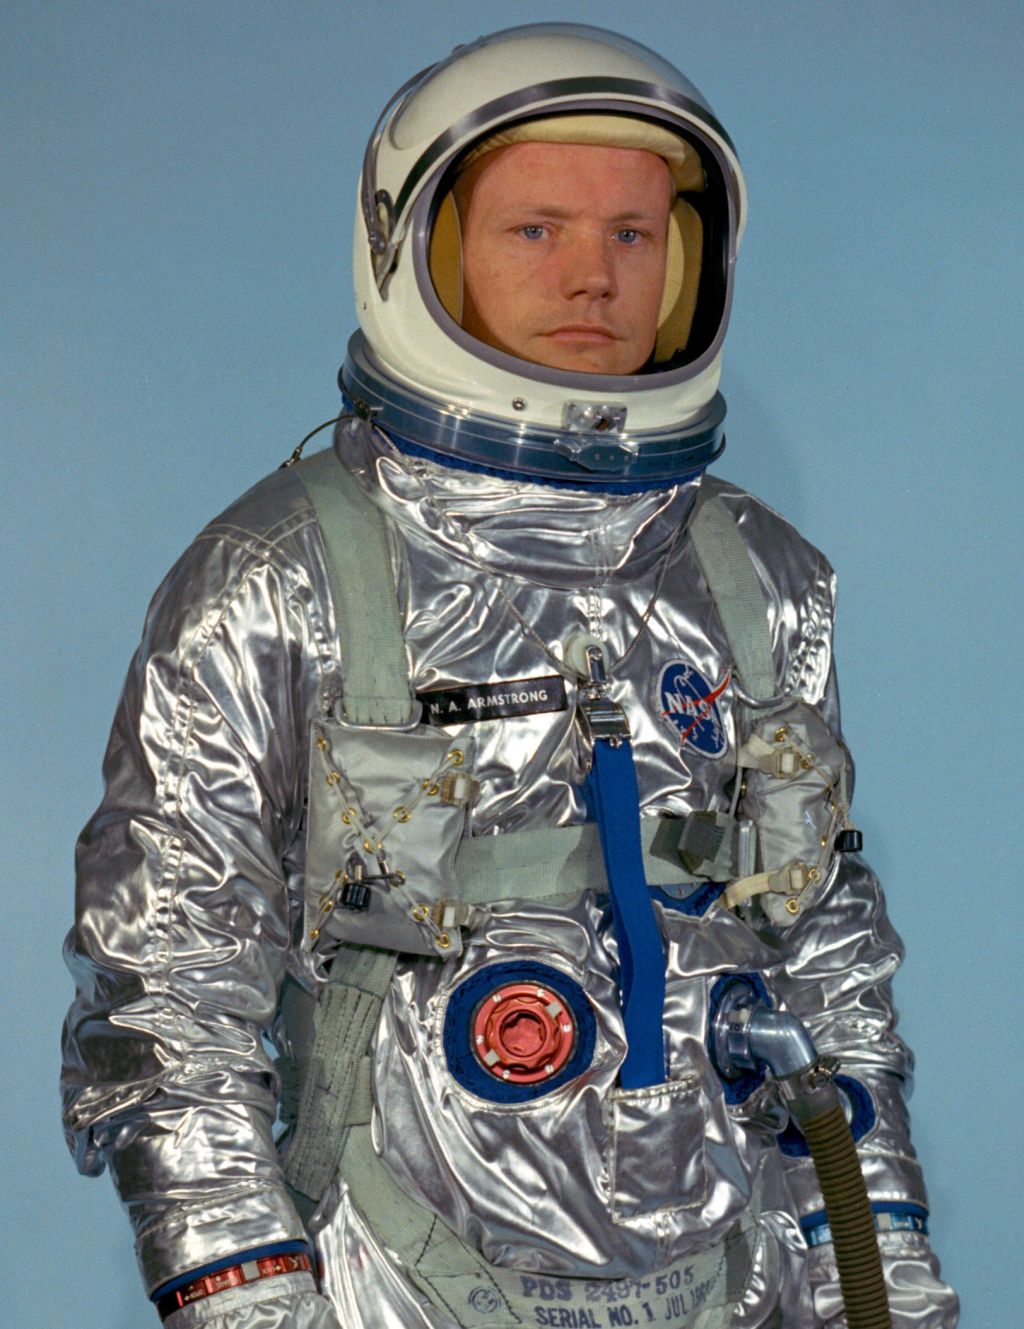 Armstrong in a Gemini training suit. NASA.